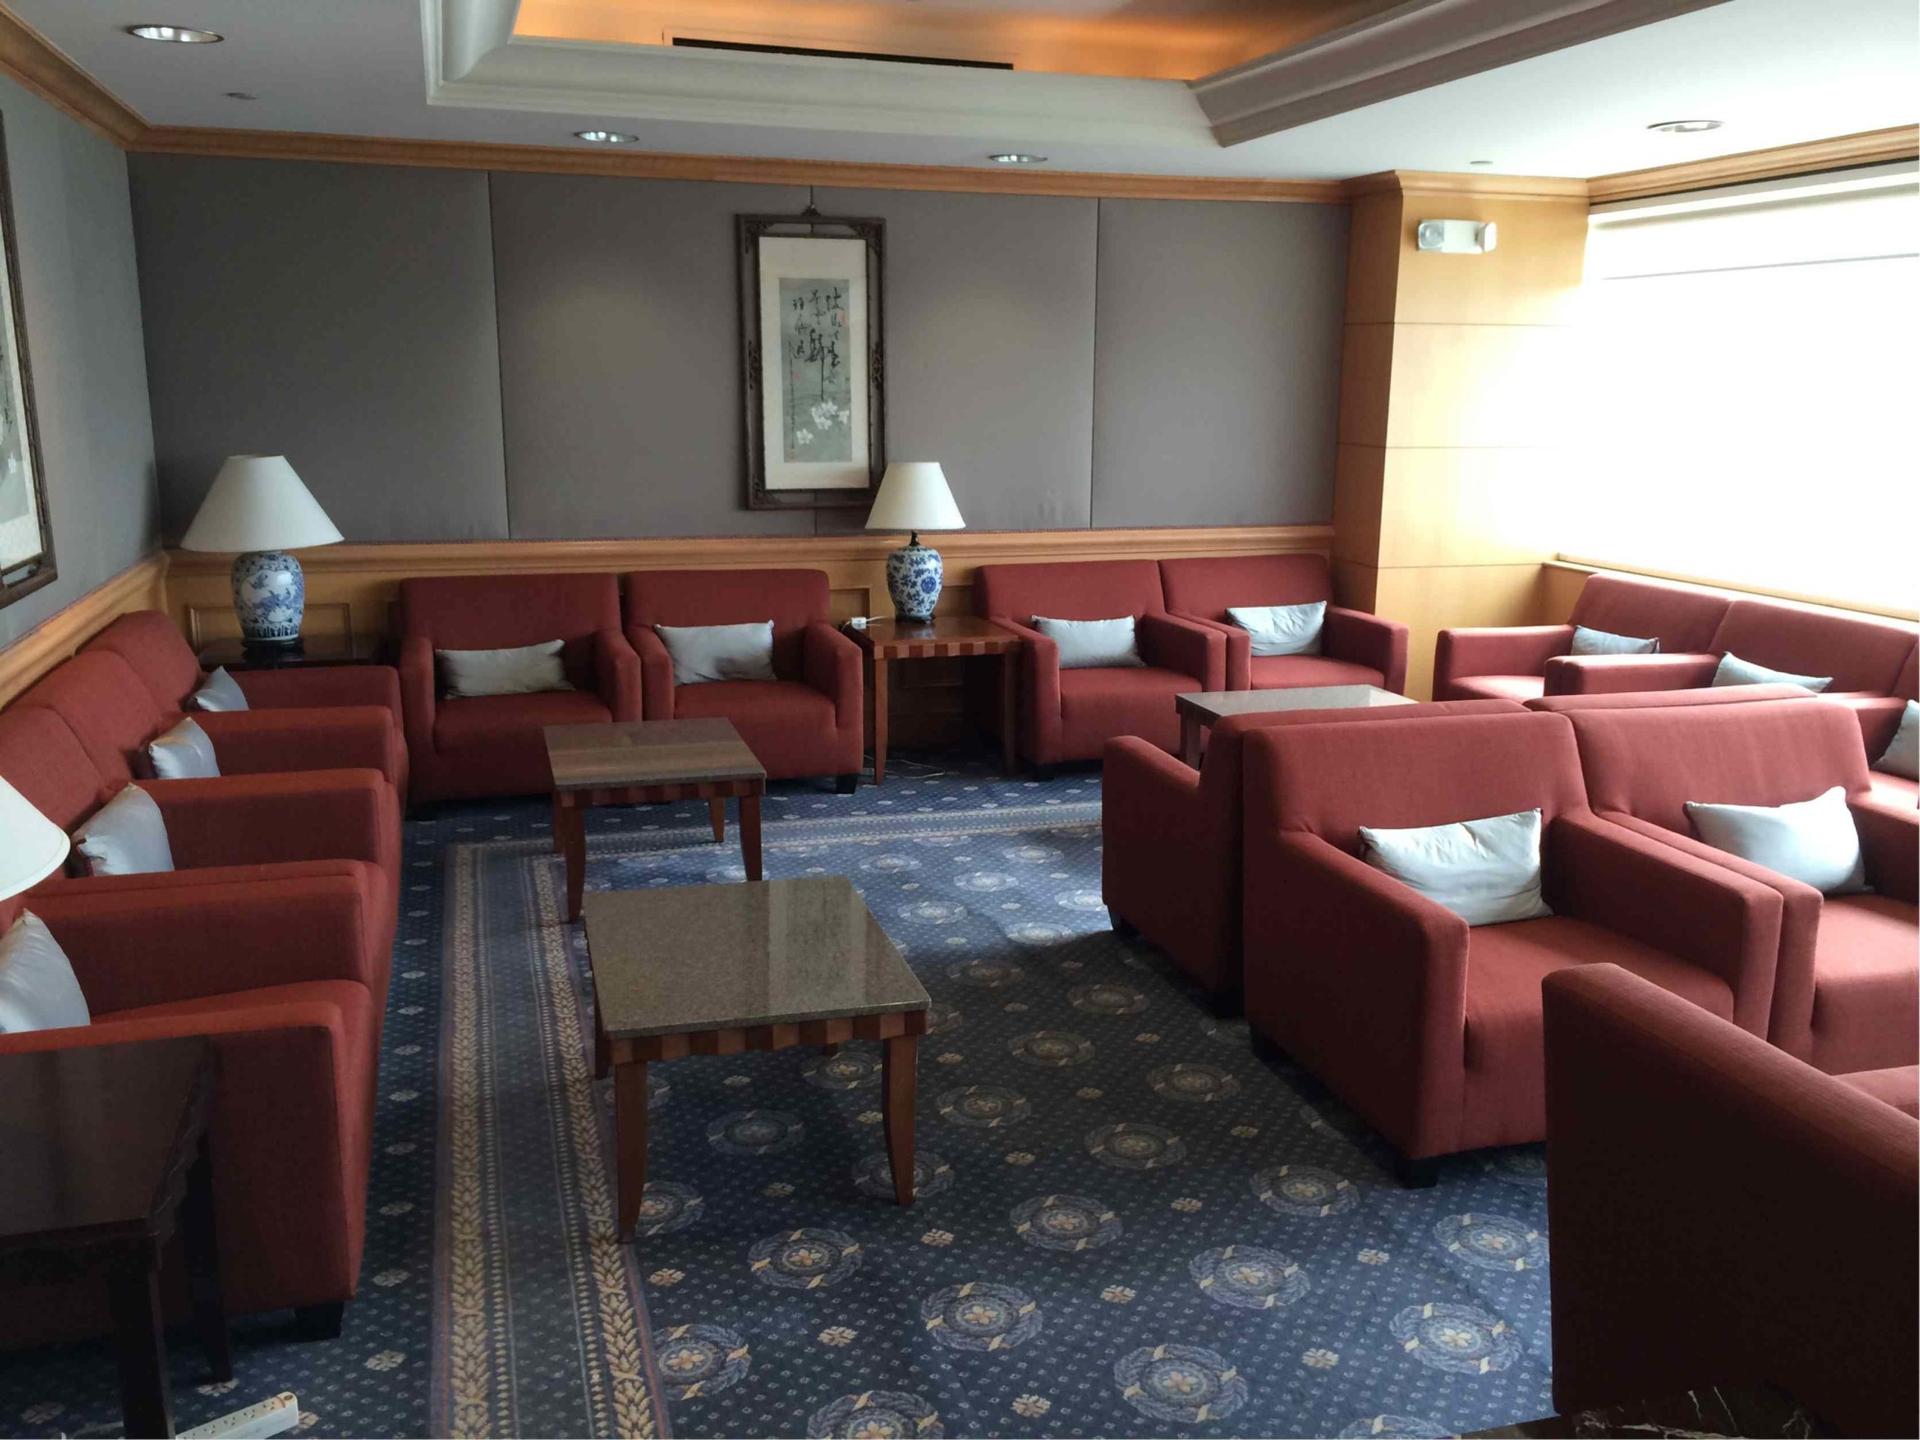 China Airlines Dynasty Lounge image 17 of 34